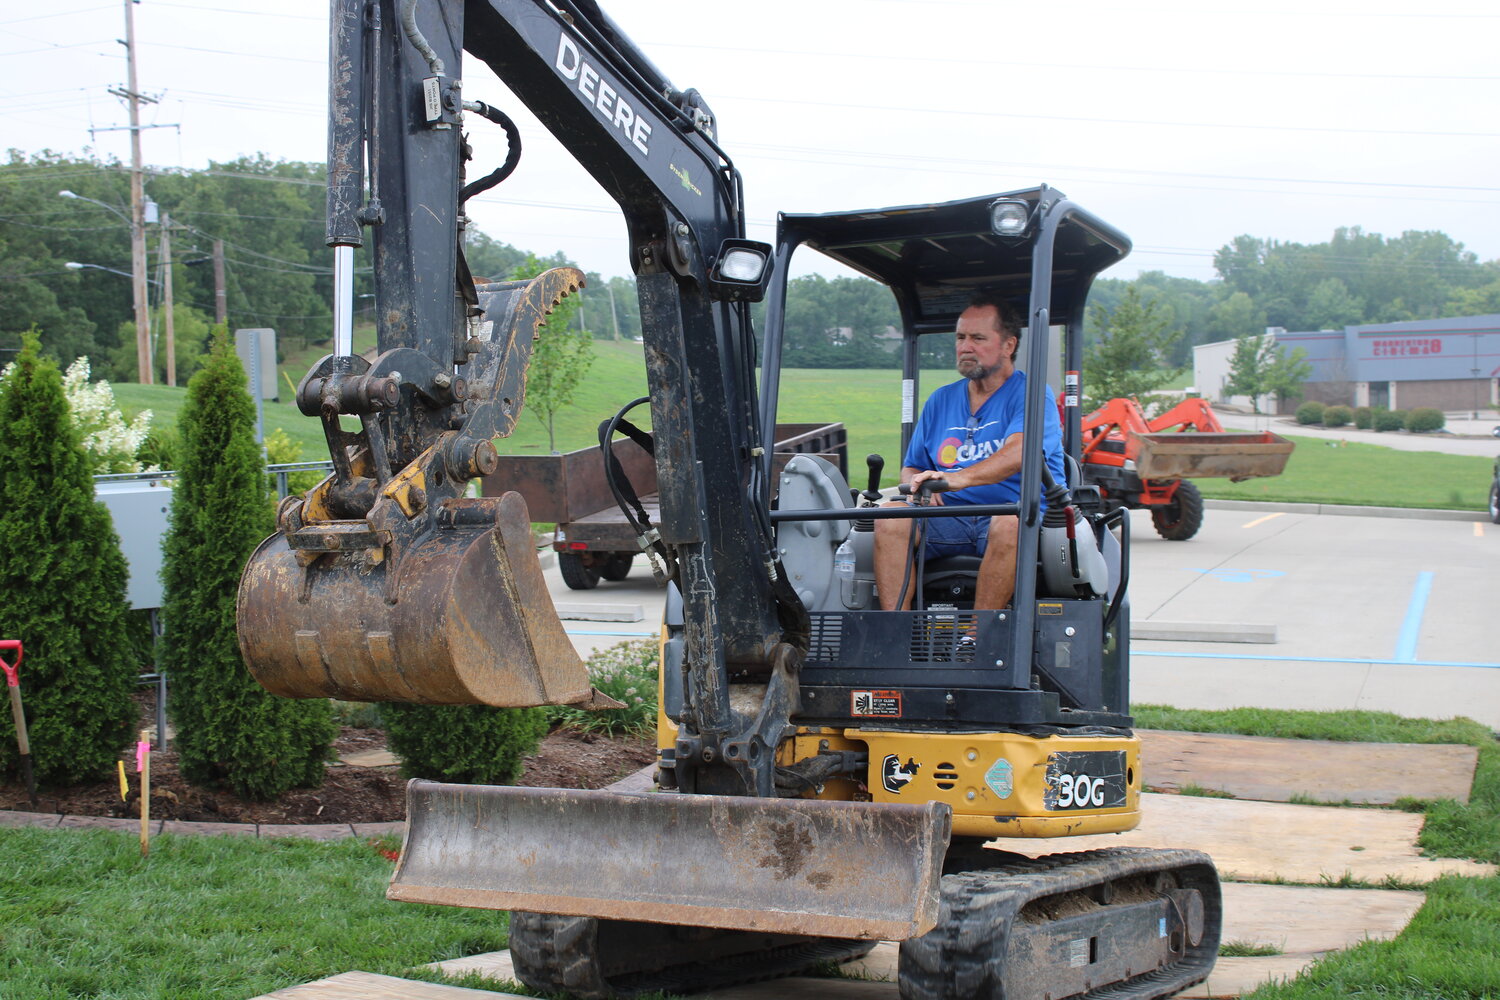 Greg Costello drives the heavy equipment that was used to prepare the site of the new Charters of Freedom.